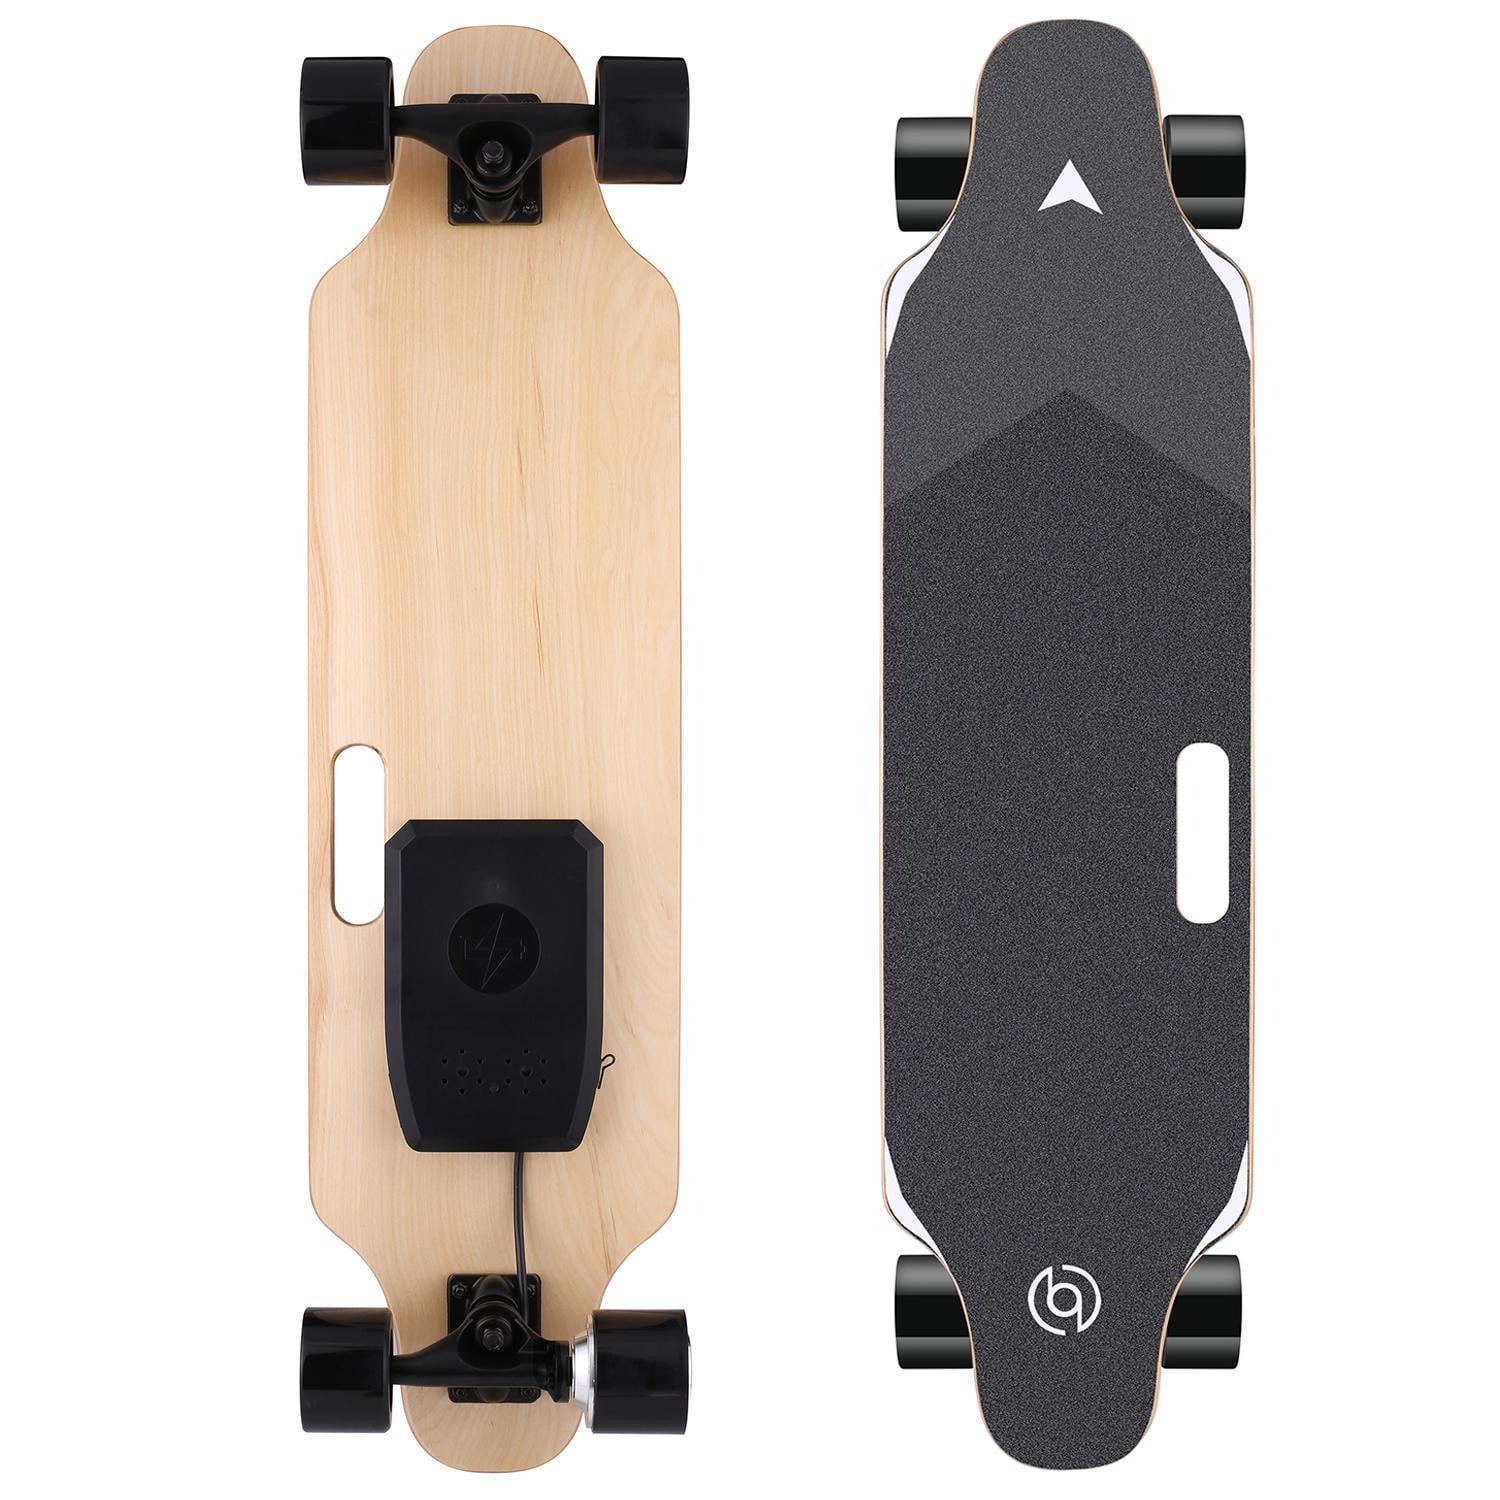 Details about   Fast Electric Skateboard 20MPH HUB Motor Remote 7 Layer Maple Board US